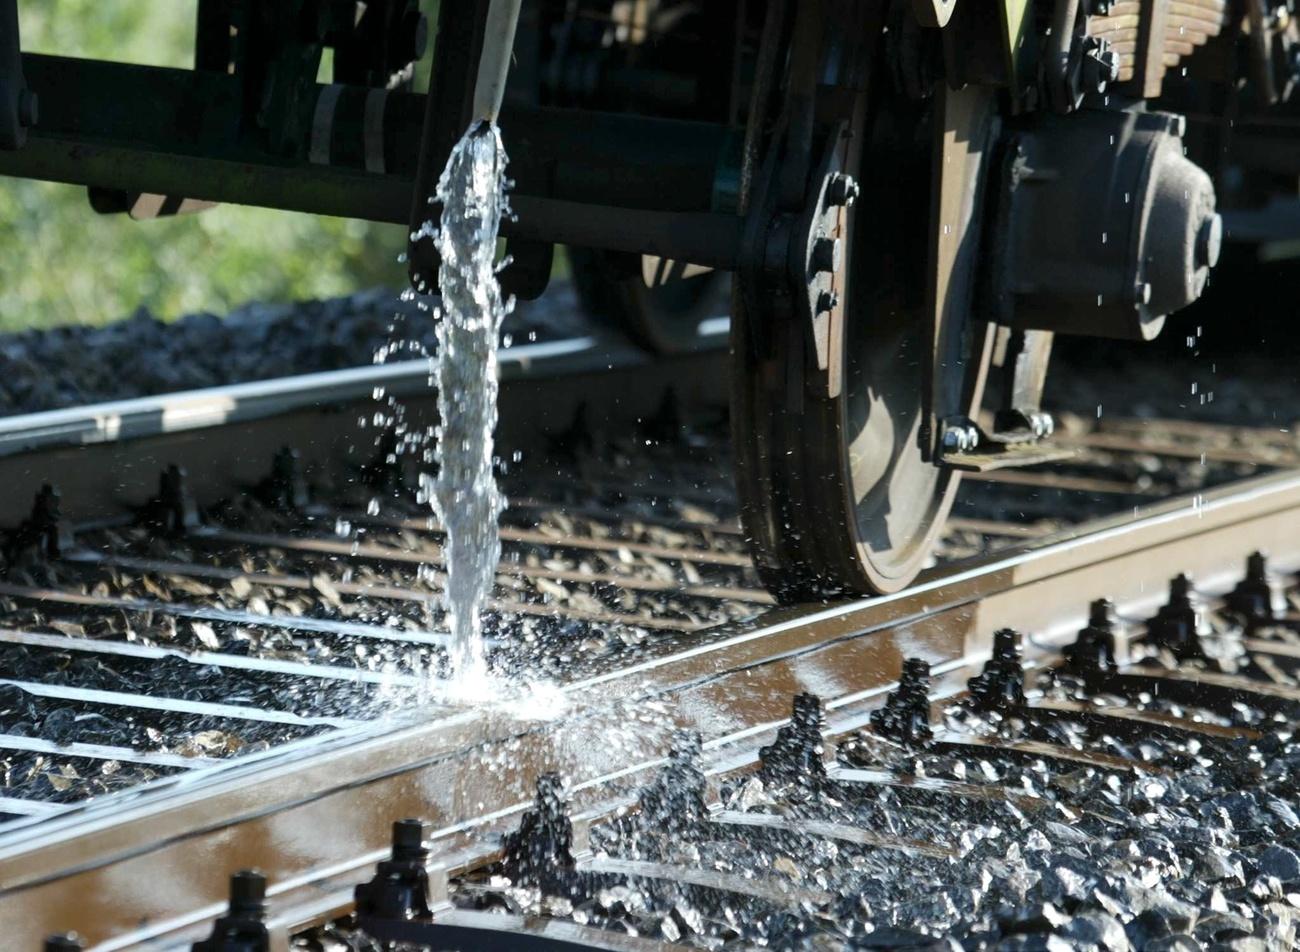 Tracks being cooled with water